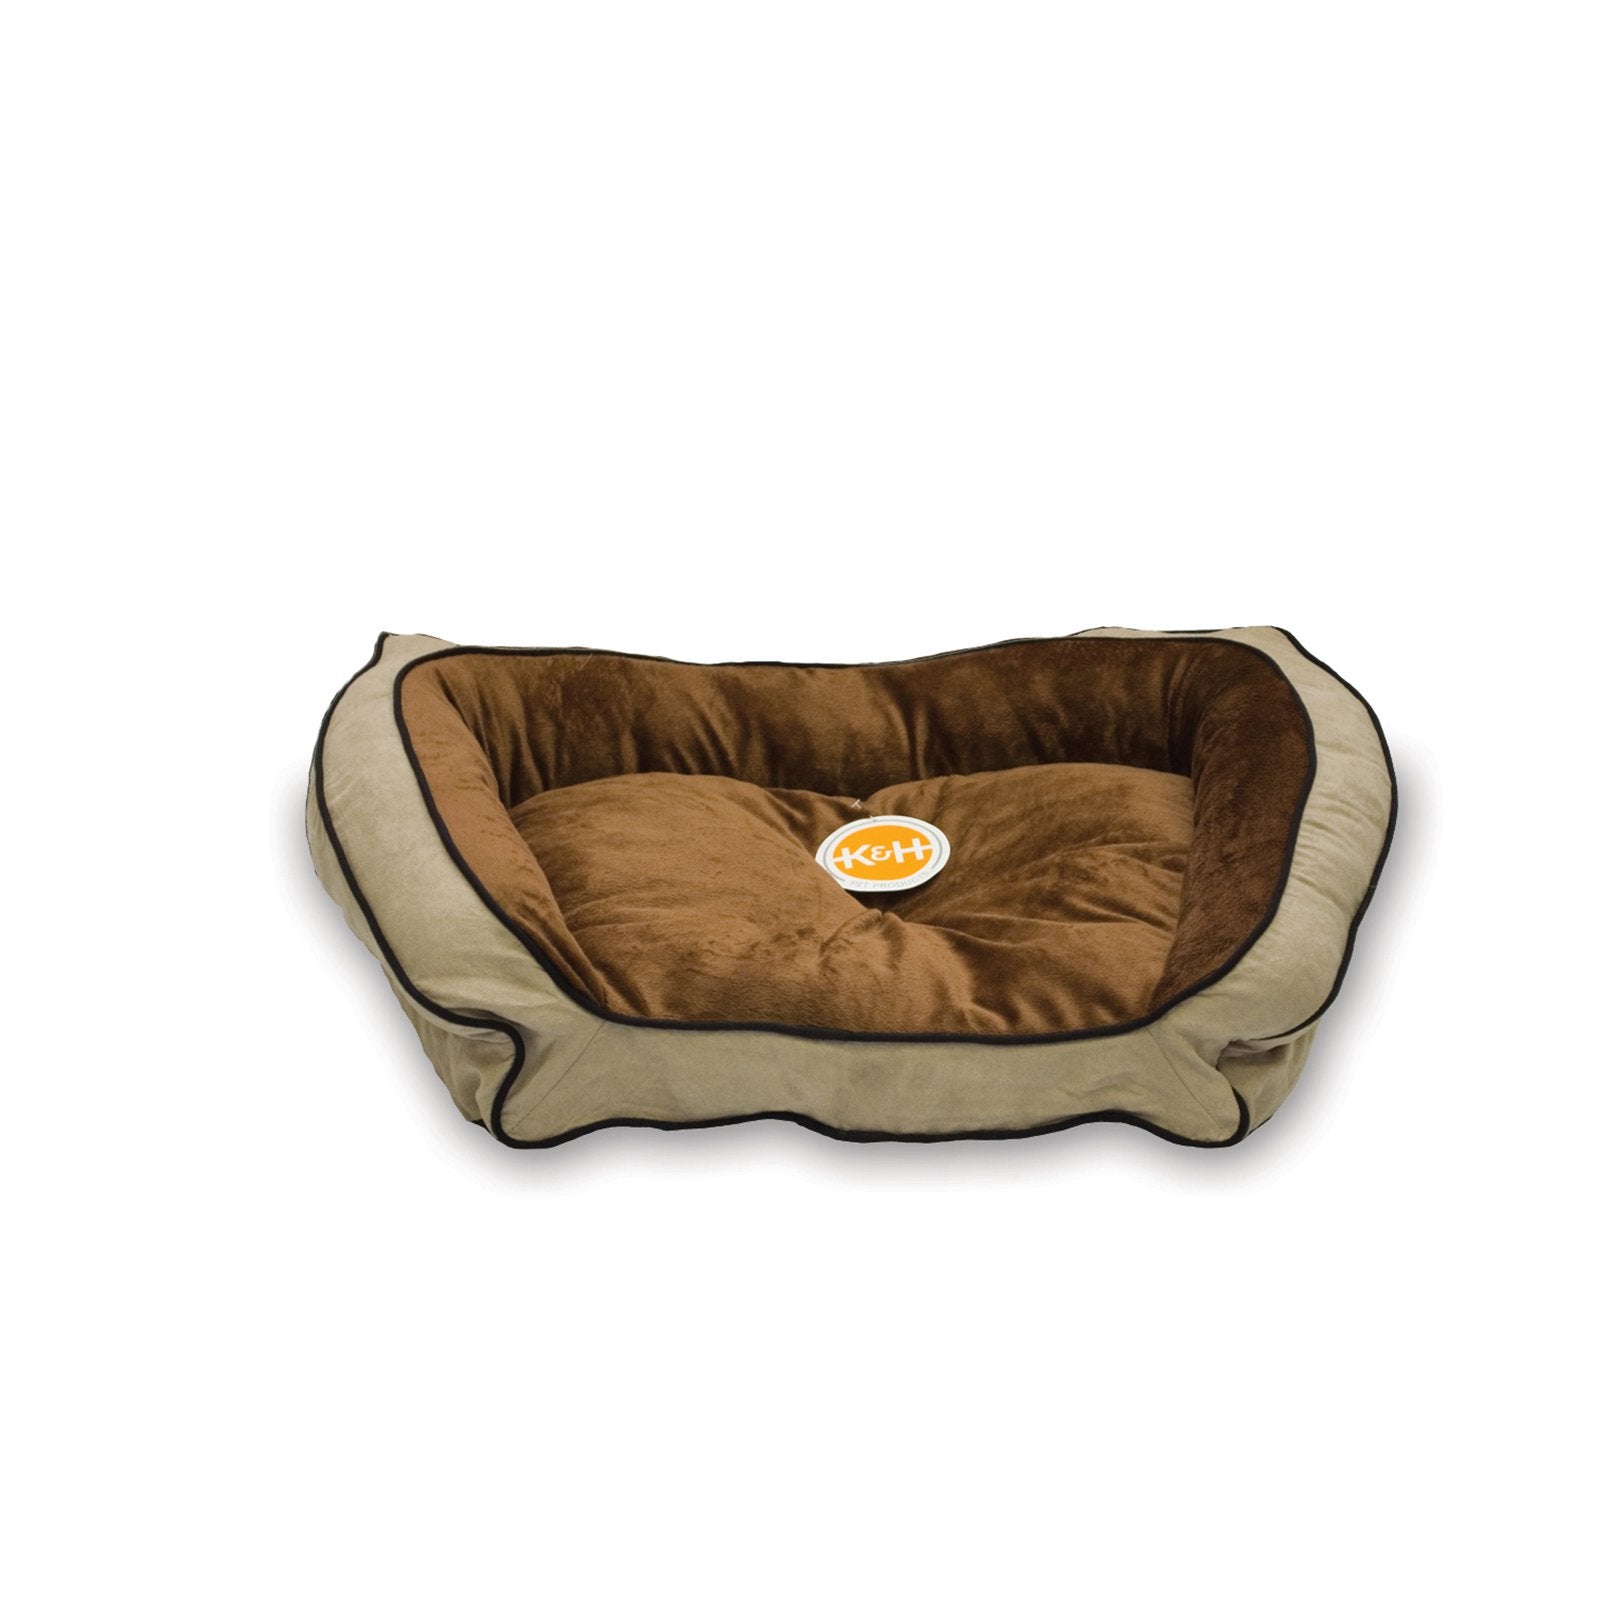 KandH Pet Products Bolster Couch Dog Bed， Large， Mocha/Tan